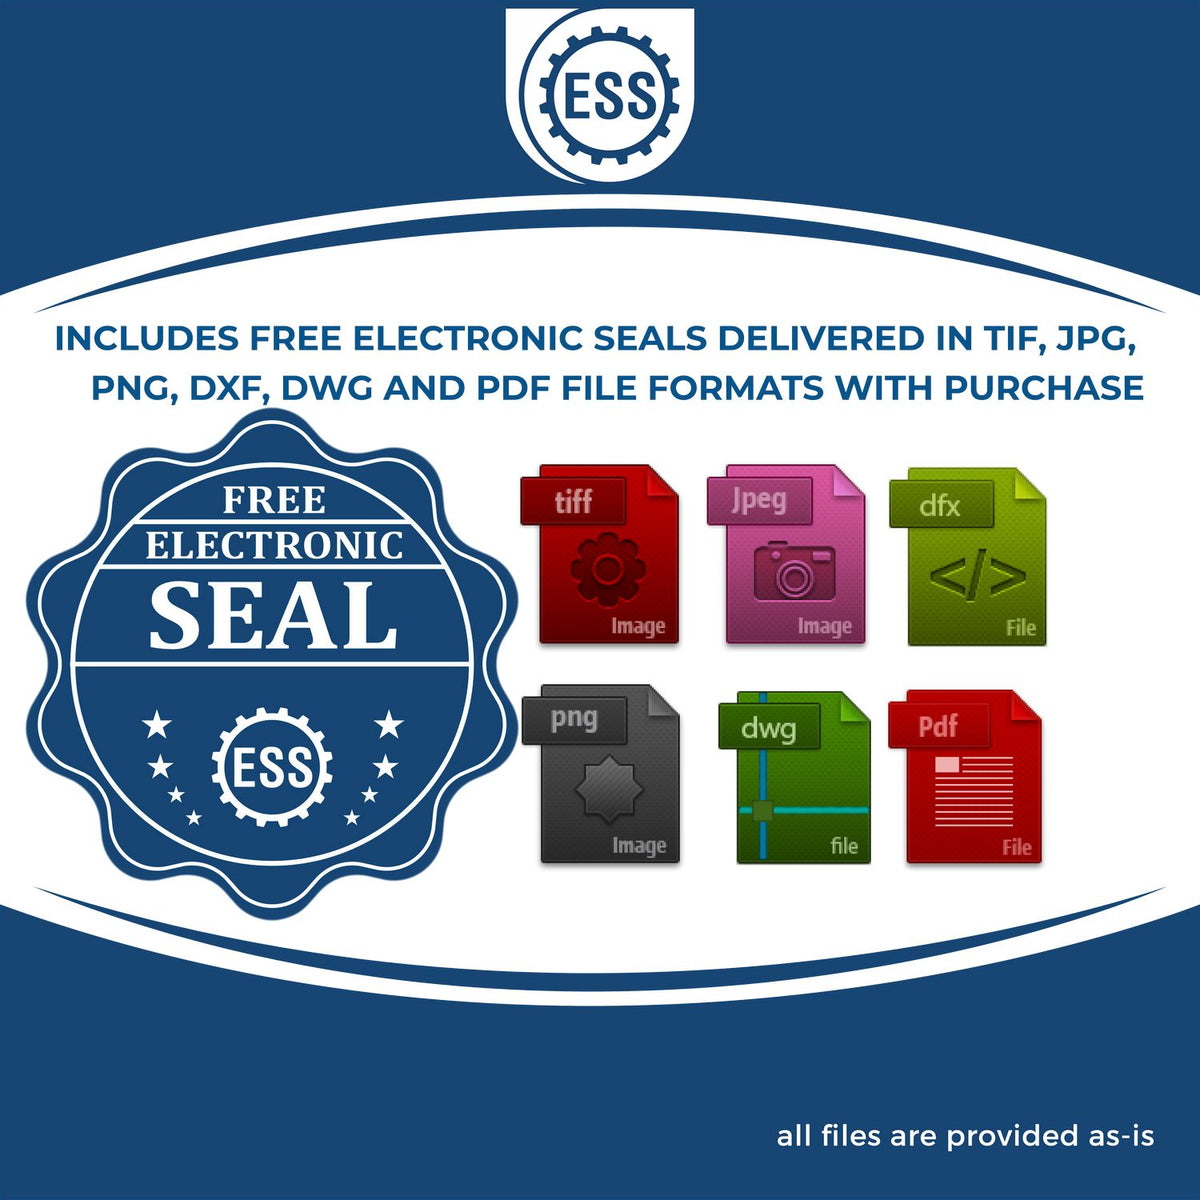 An infographic for the free electronic seal for the Hybrid Tennessee Architect Seal illustrating the different file type icons such as DXF, DWG, TIF, JPG and PNG.